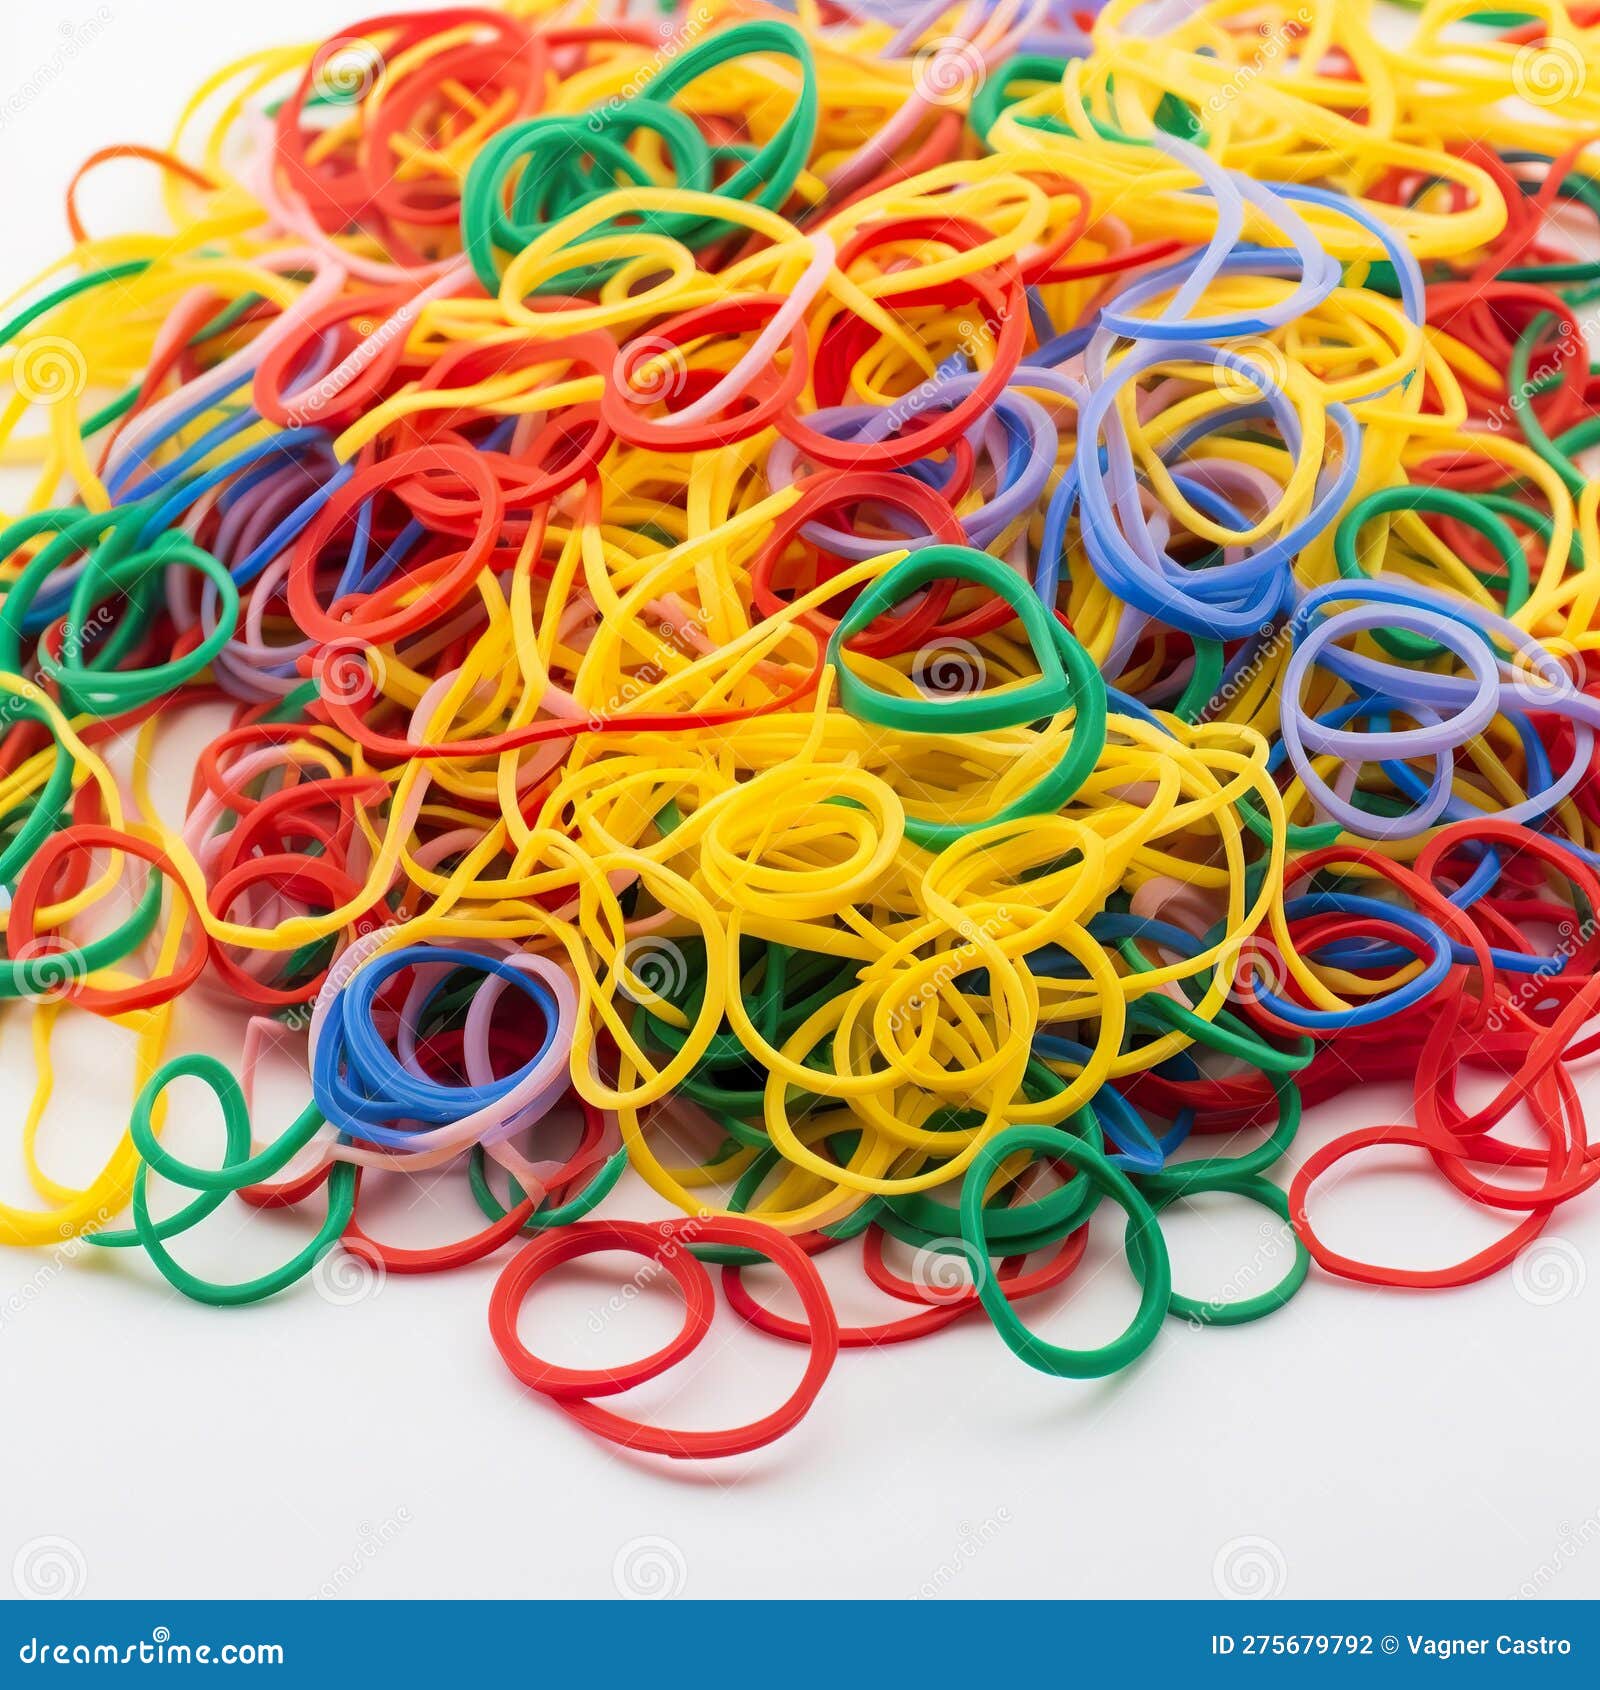 Bunch of Colorful Multi Color Small Rubber Bands Elastic Bands on a White  Background Stock Illustration - Illustration of orange, white: 275679792